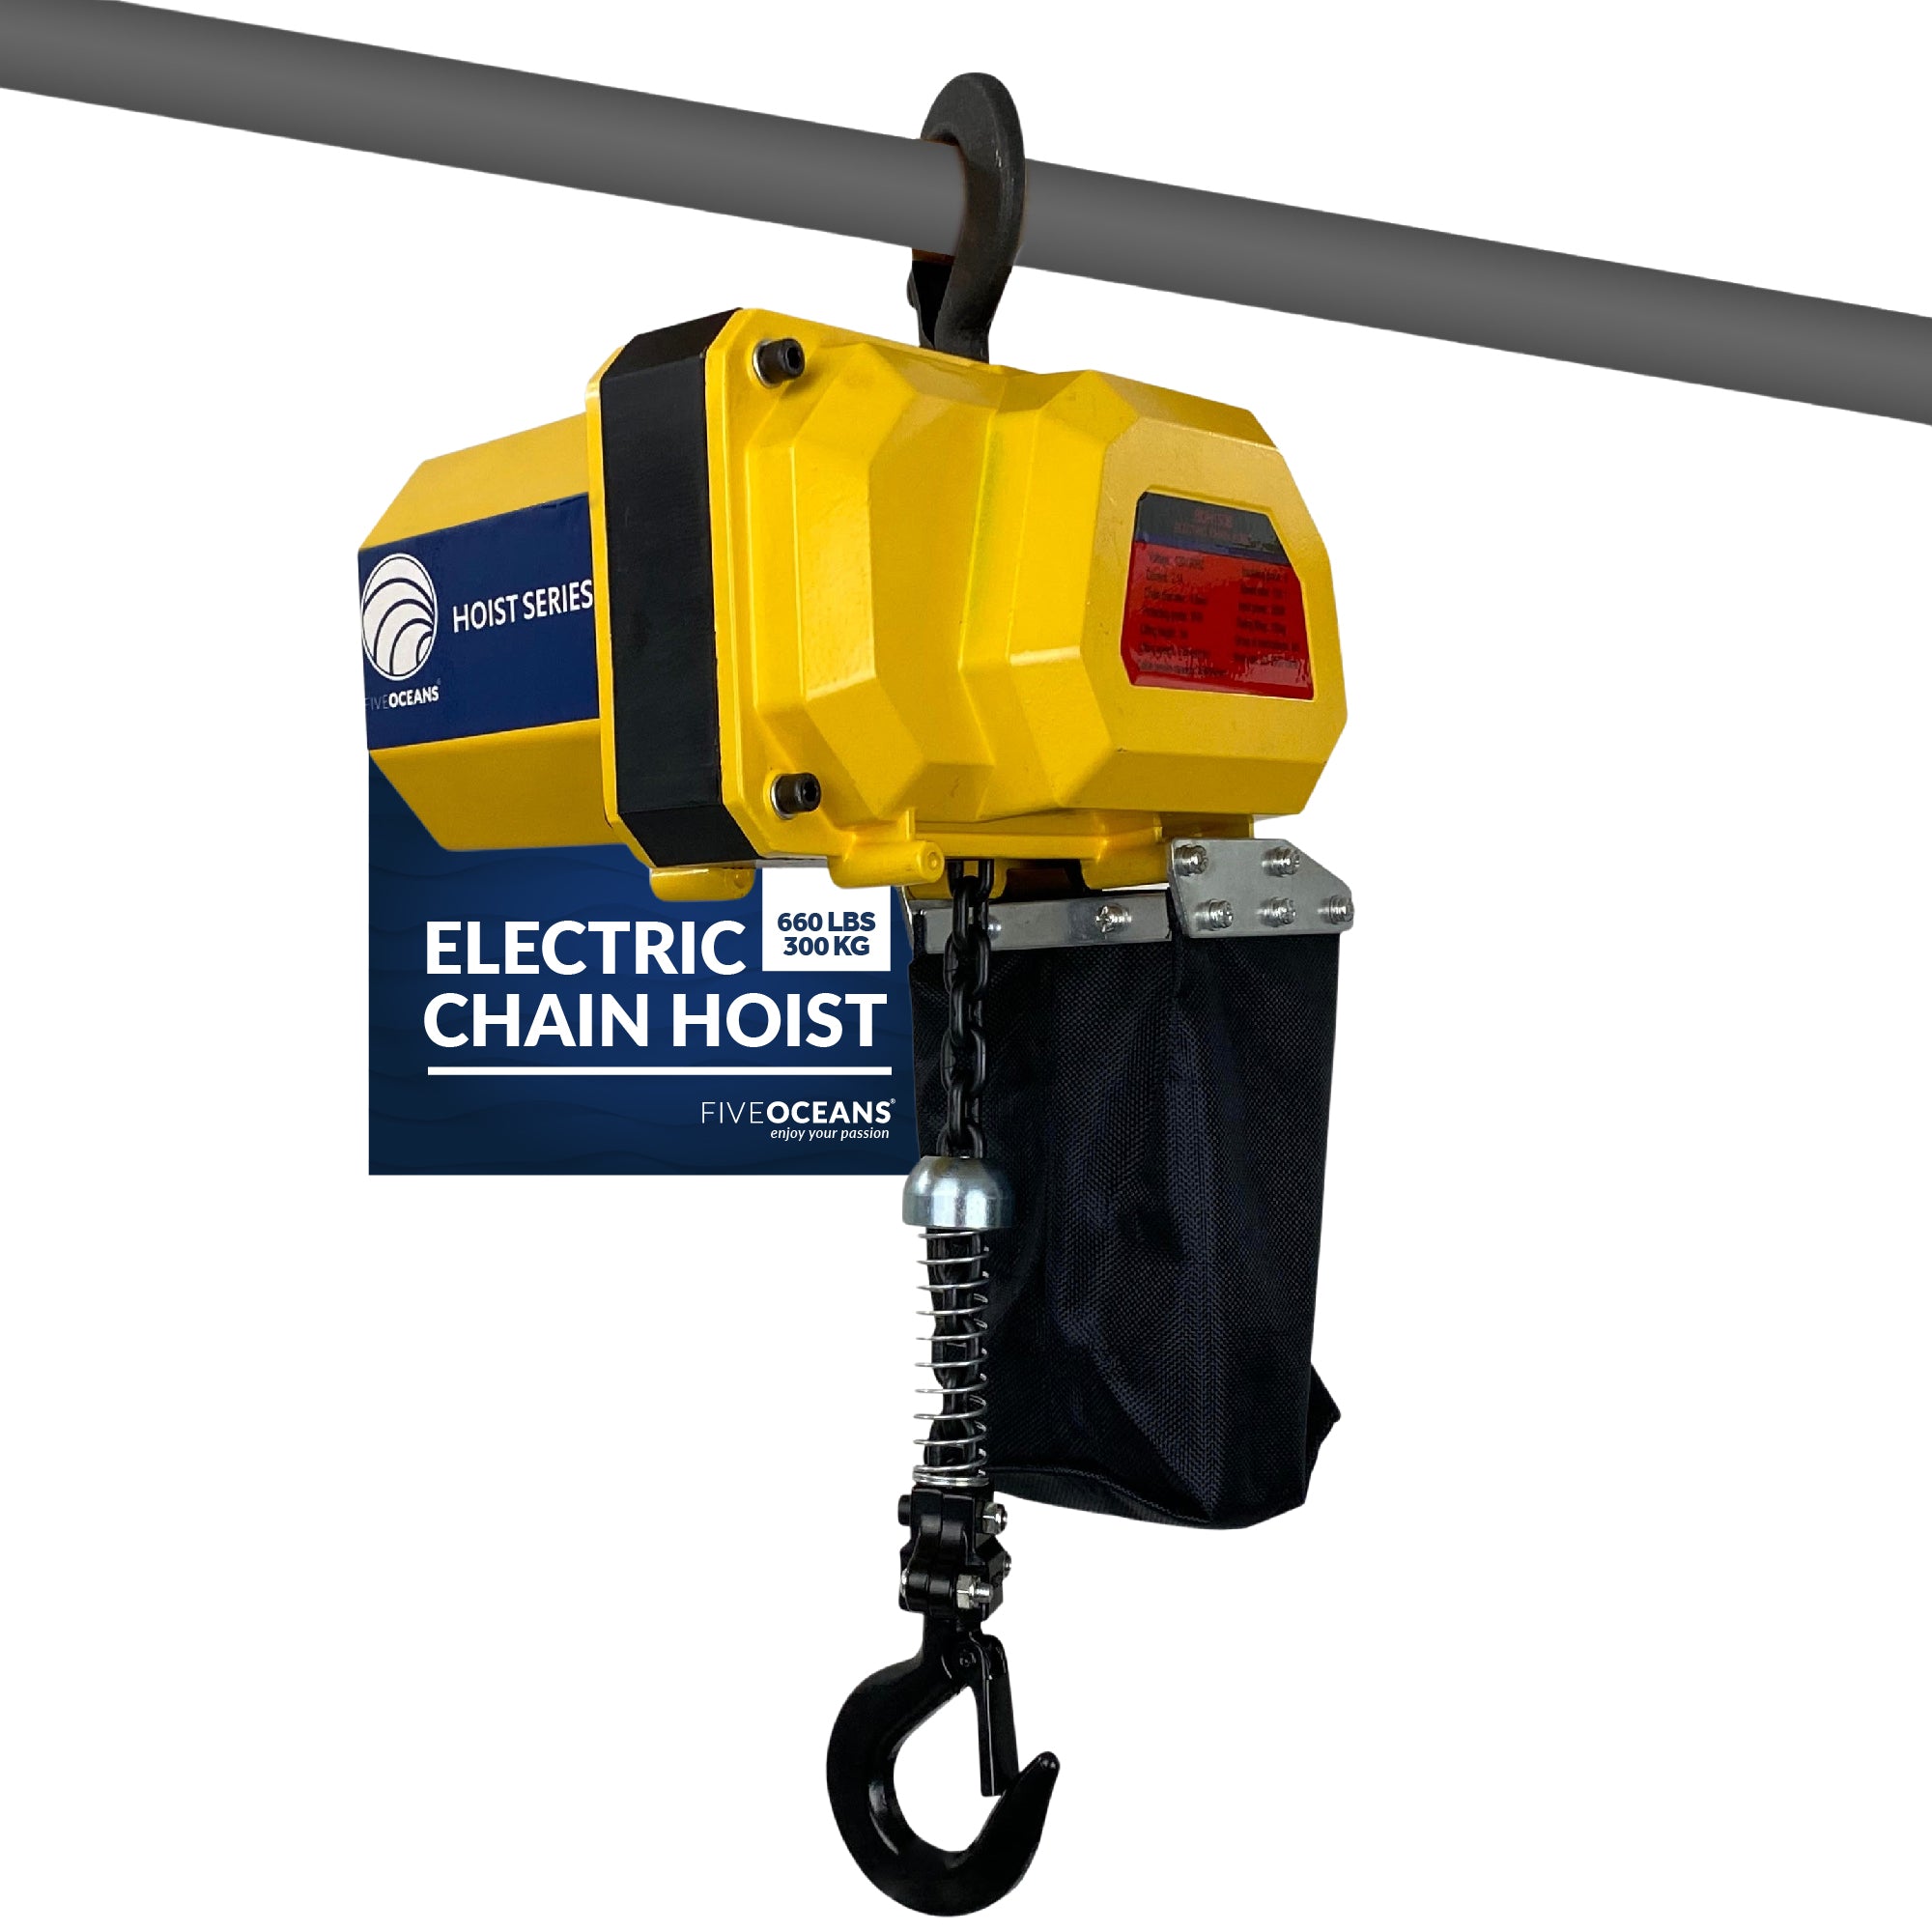 Electric Chain Hoist 660LBS / 300KG, 20 FT Remote Control, 120 V / 60 HZ - FO4441